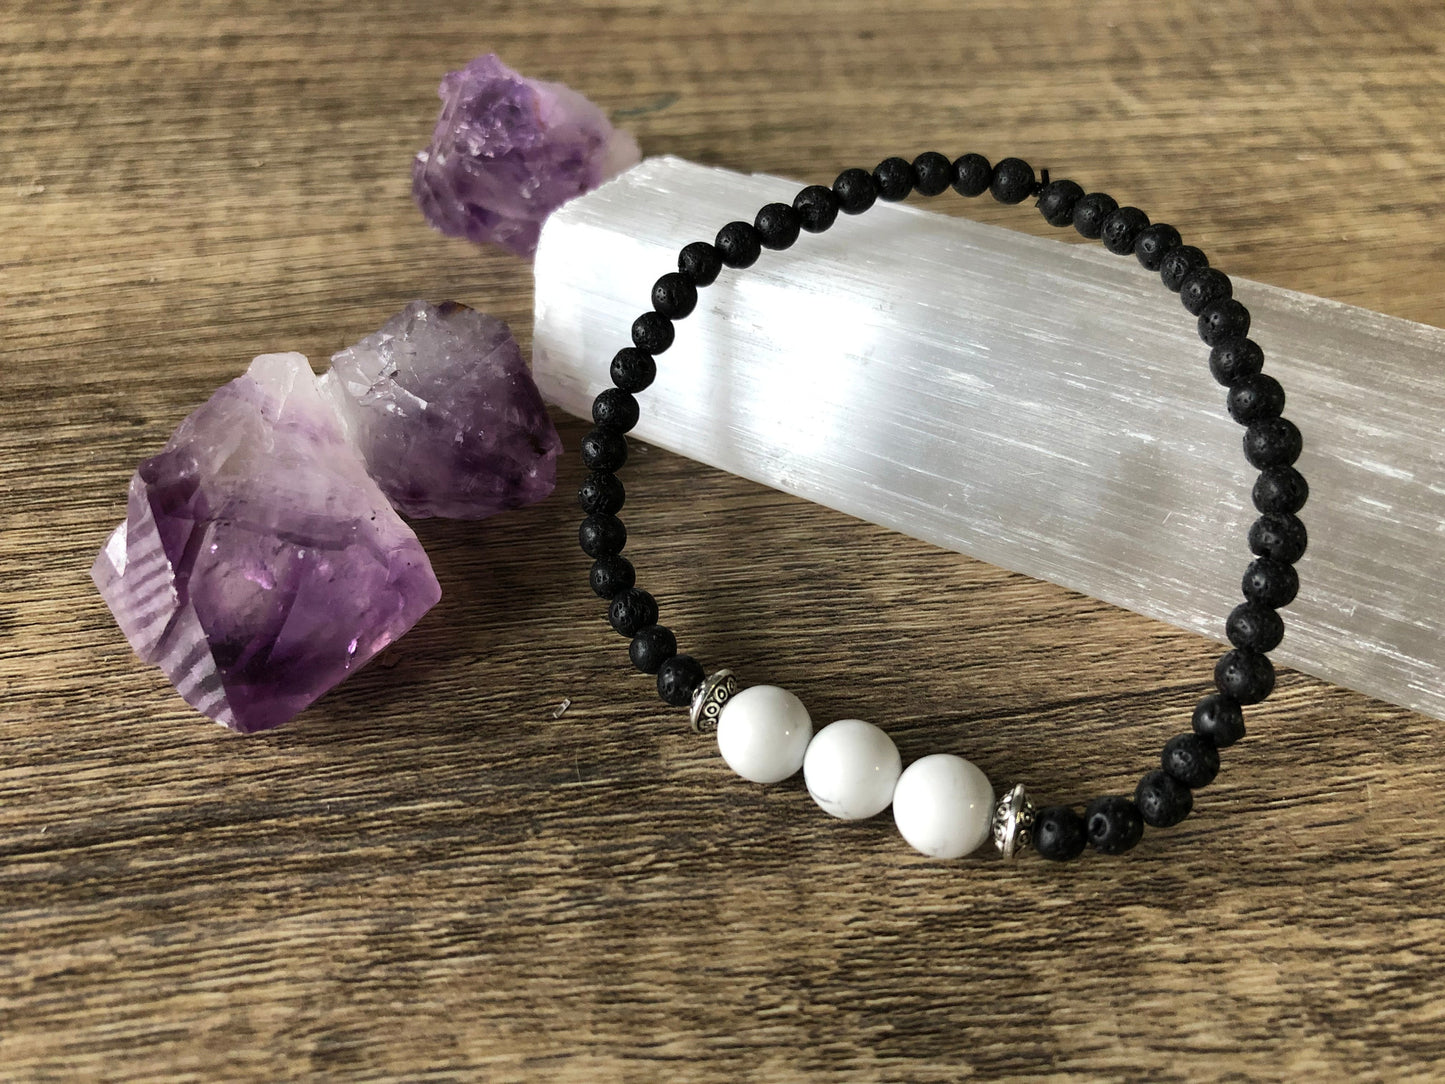 Pictured is a howlite and lava bead bracelet.